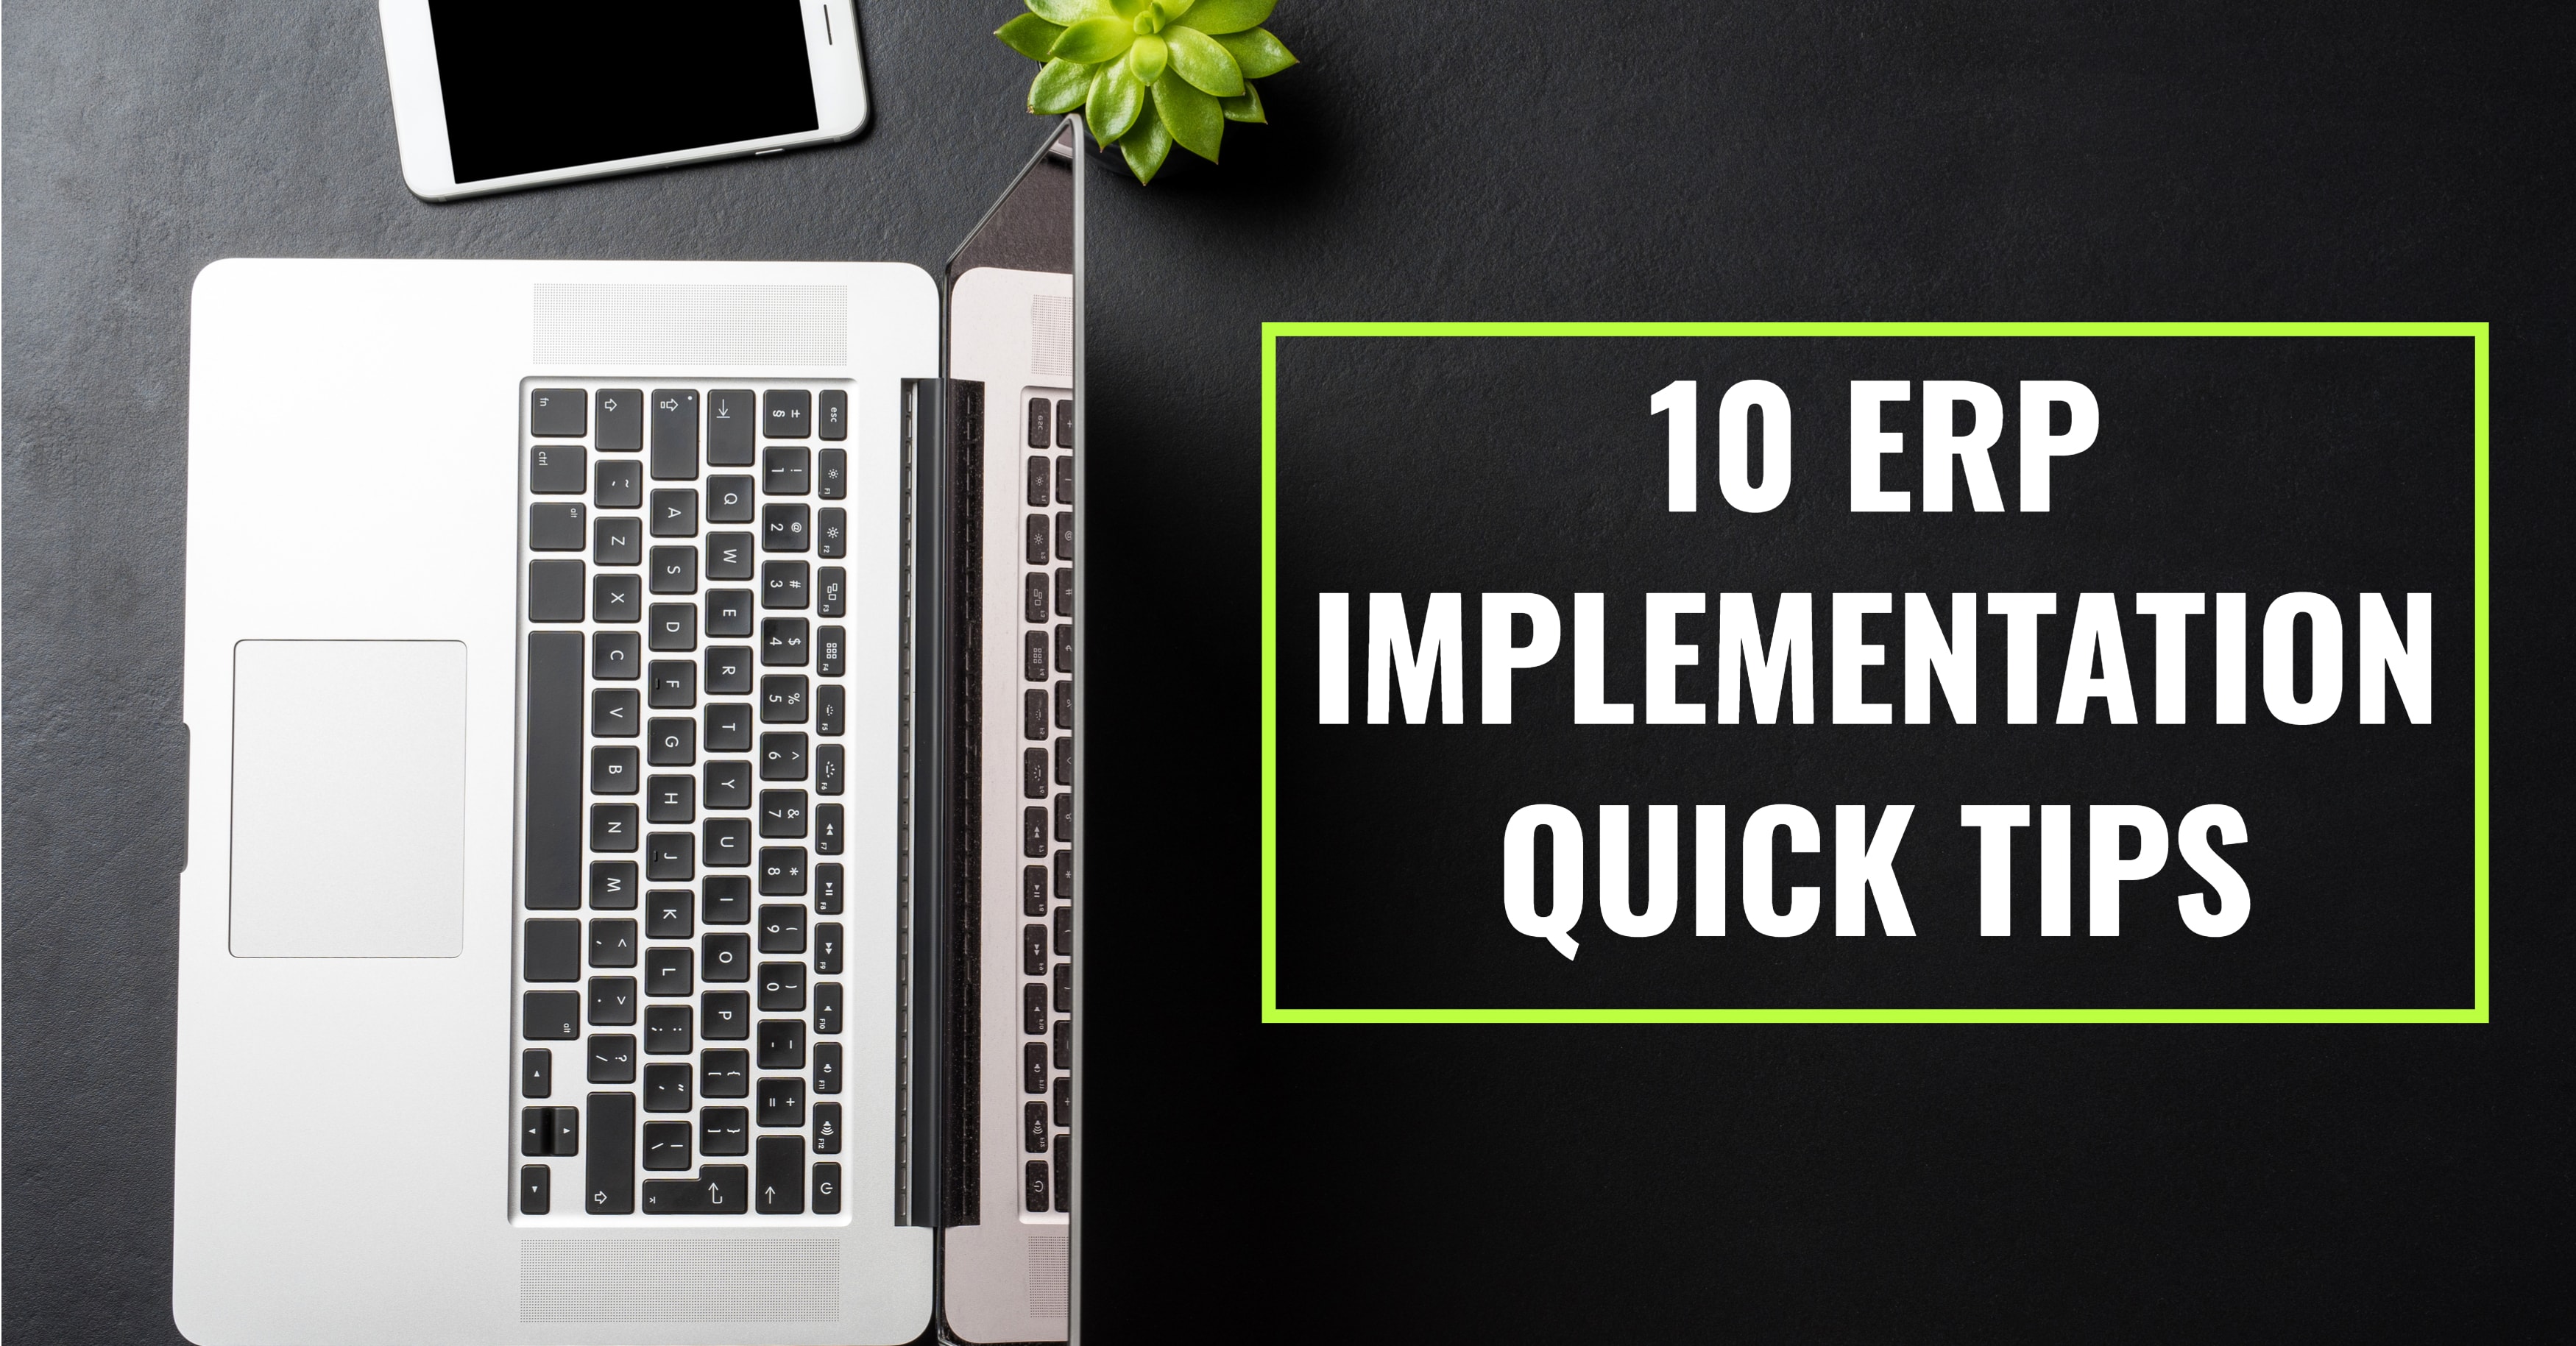 ERP Implementation Quick Tips